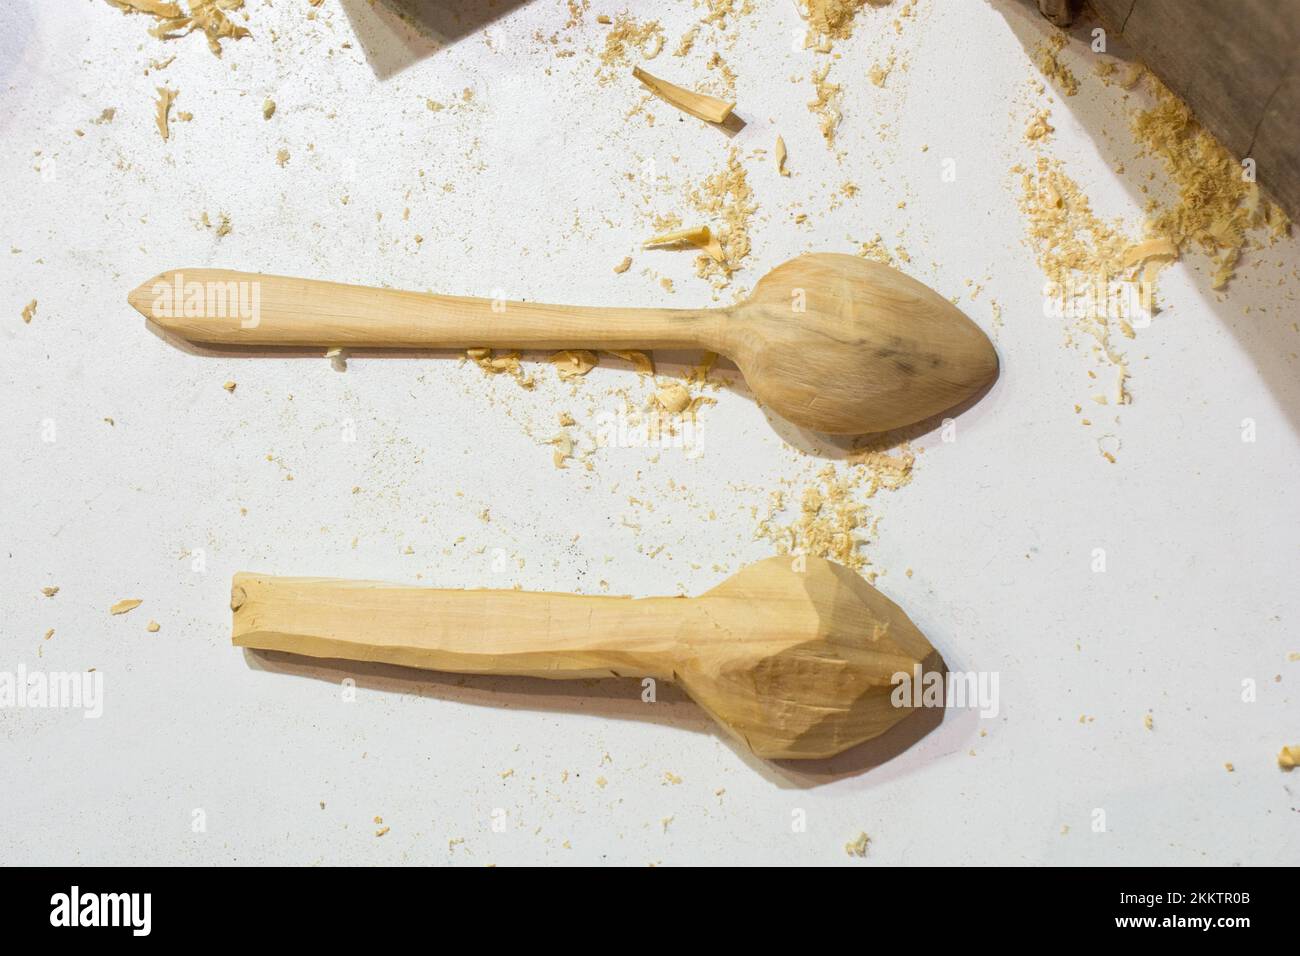 Soup spoon or tablespoon made of wood Stock Photo